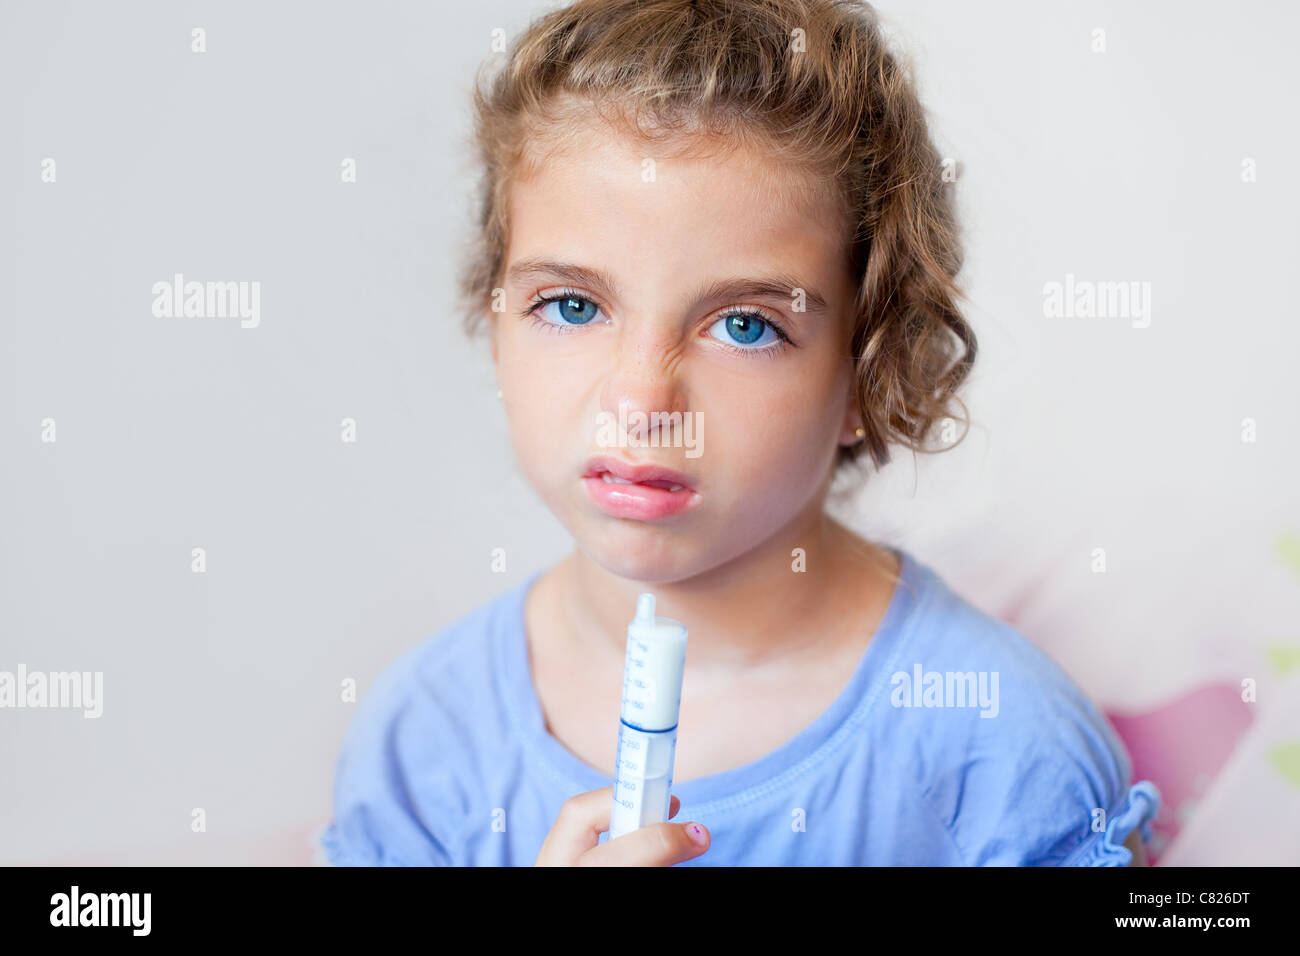 Unhappy kid girl with syringe medicine dose funny expression Stock Photo